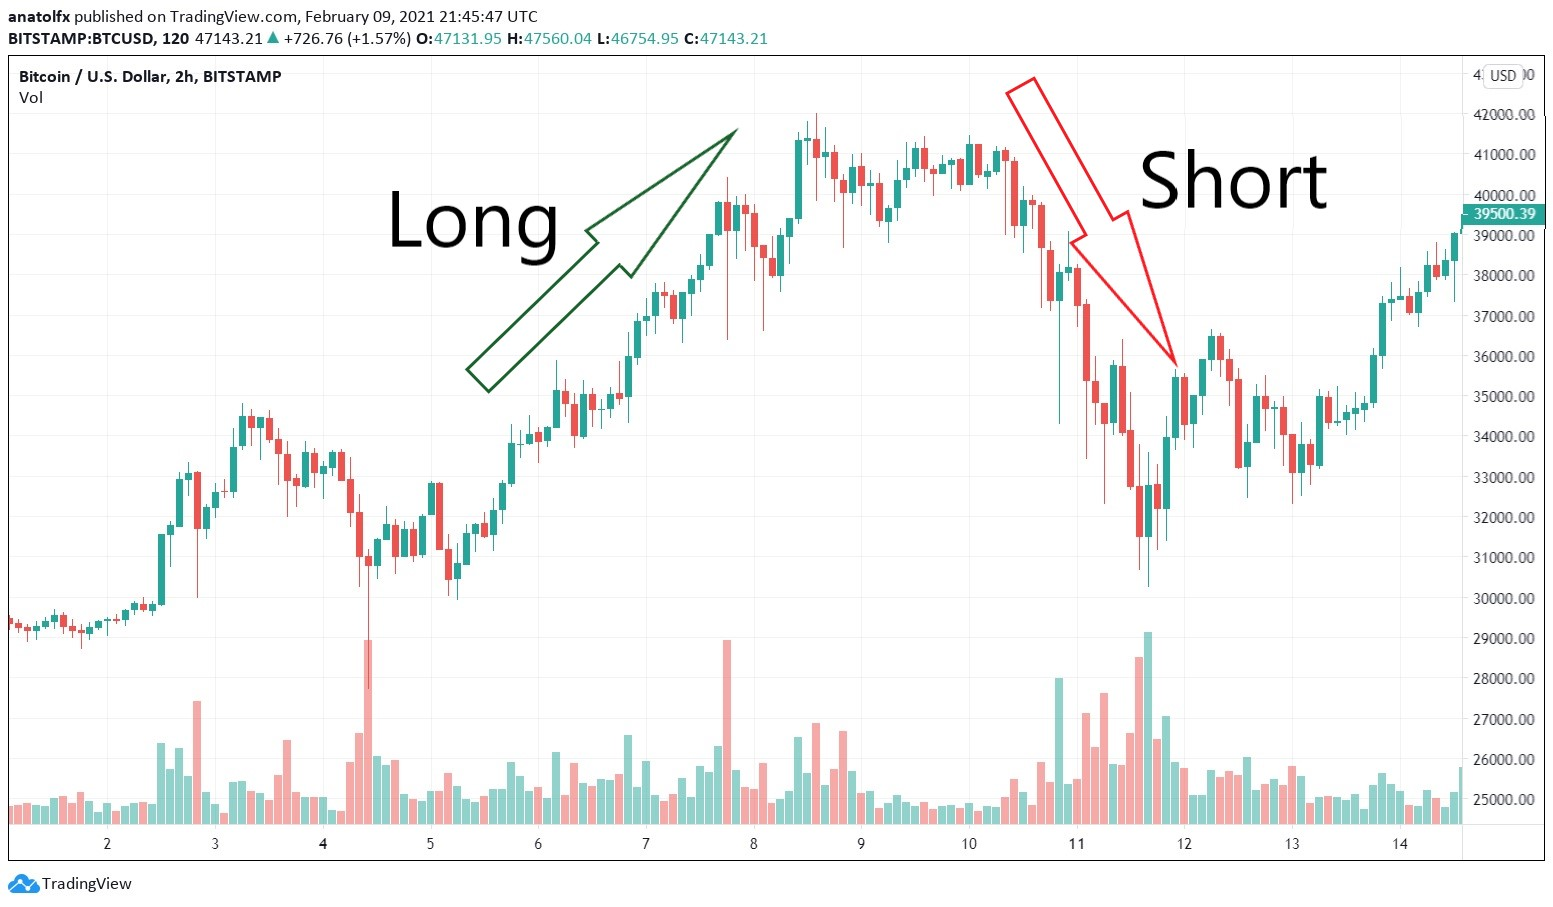 5 Best Exchanges to Short Crypto- Top Crypto Shorting Platforms